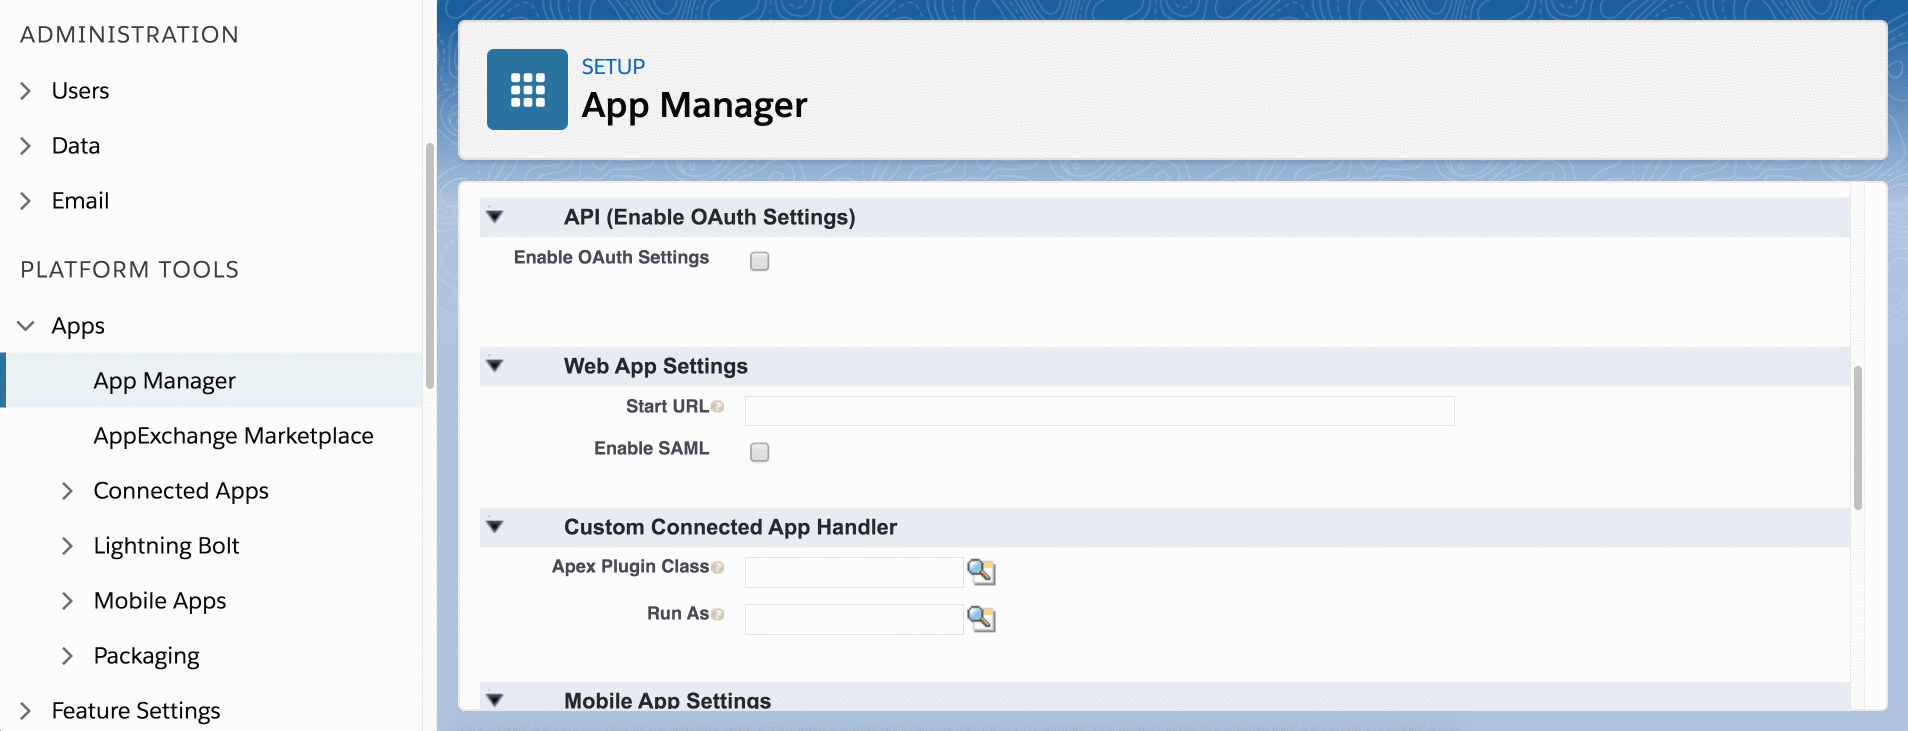 Create_a_new_Salesforce_connected_app_by_completing_the_API_fields_to_enable_OAuth_settings___Tethr_customer_integrations_support_larger_fields.gif